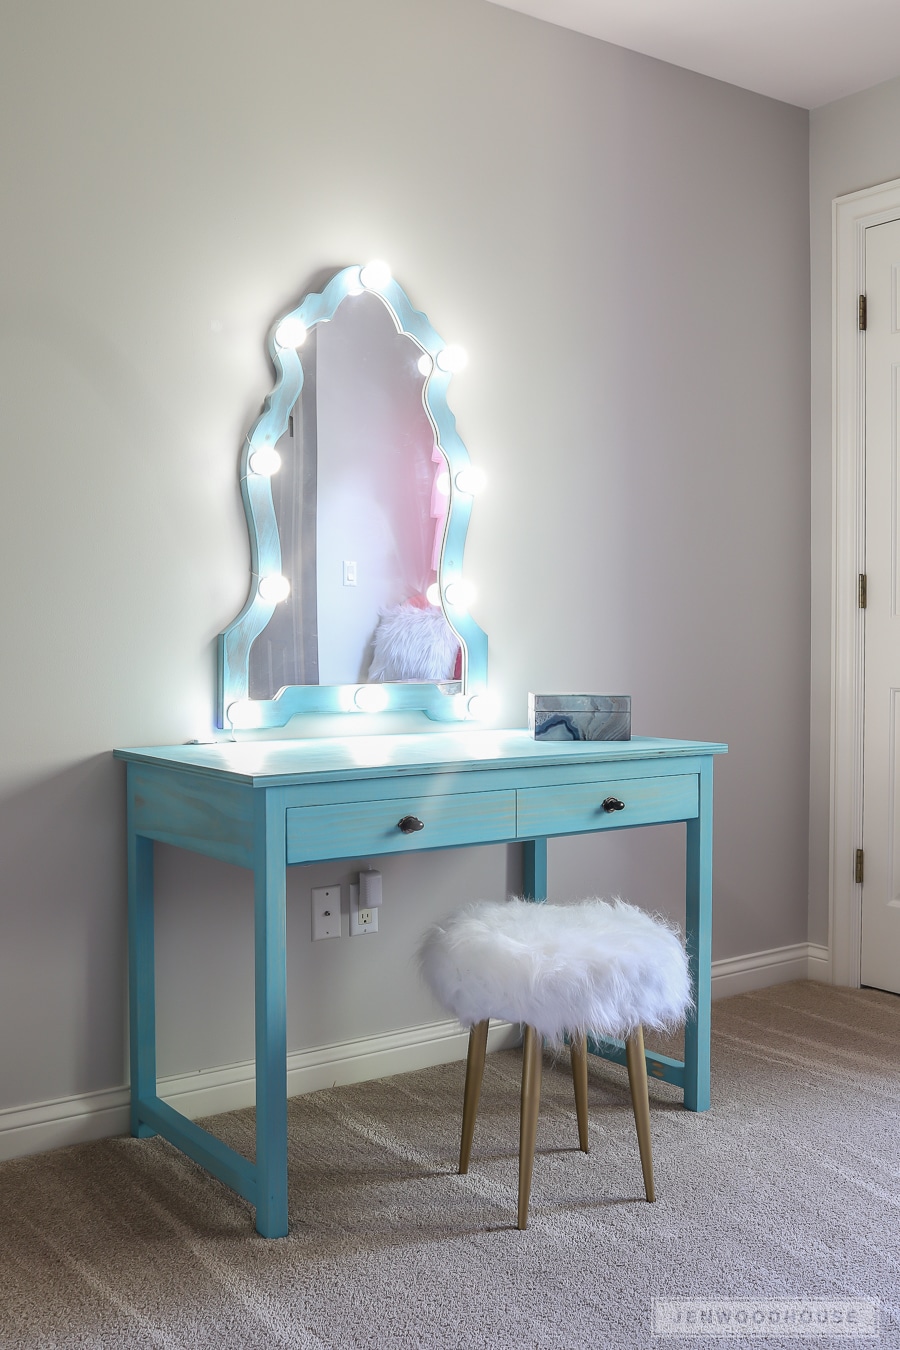 How To Build A Diy Makeup Vanity With, How To Turn A Dresser Into Makeup Vanity